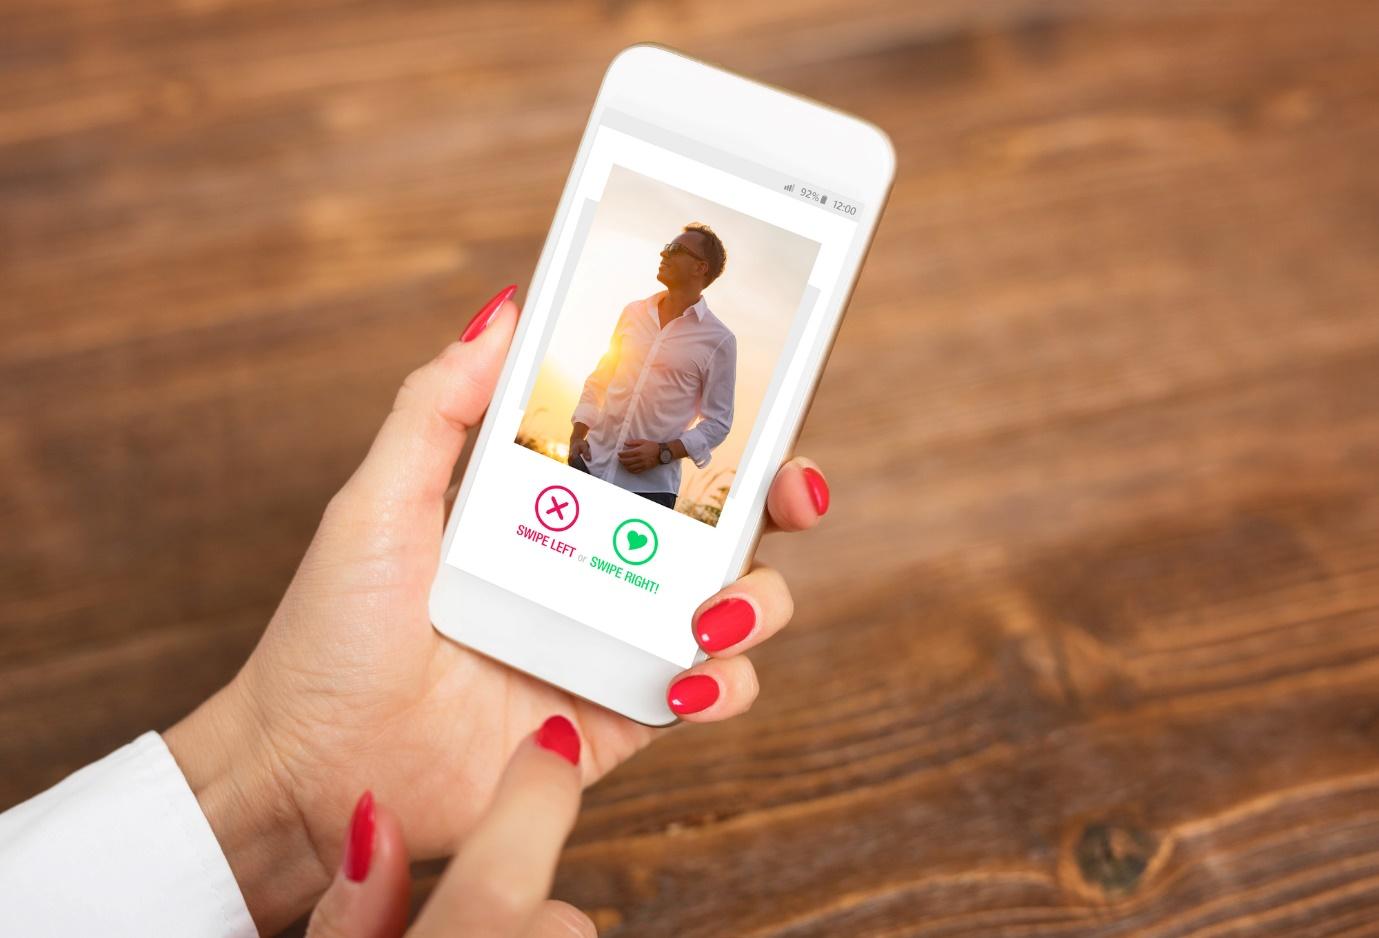 5 Common Dating App Mistakes and How to Avoid Them